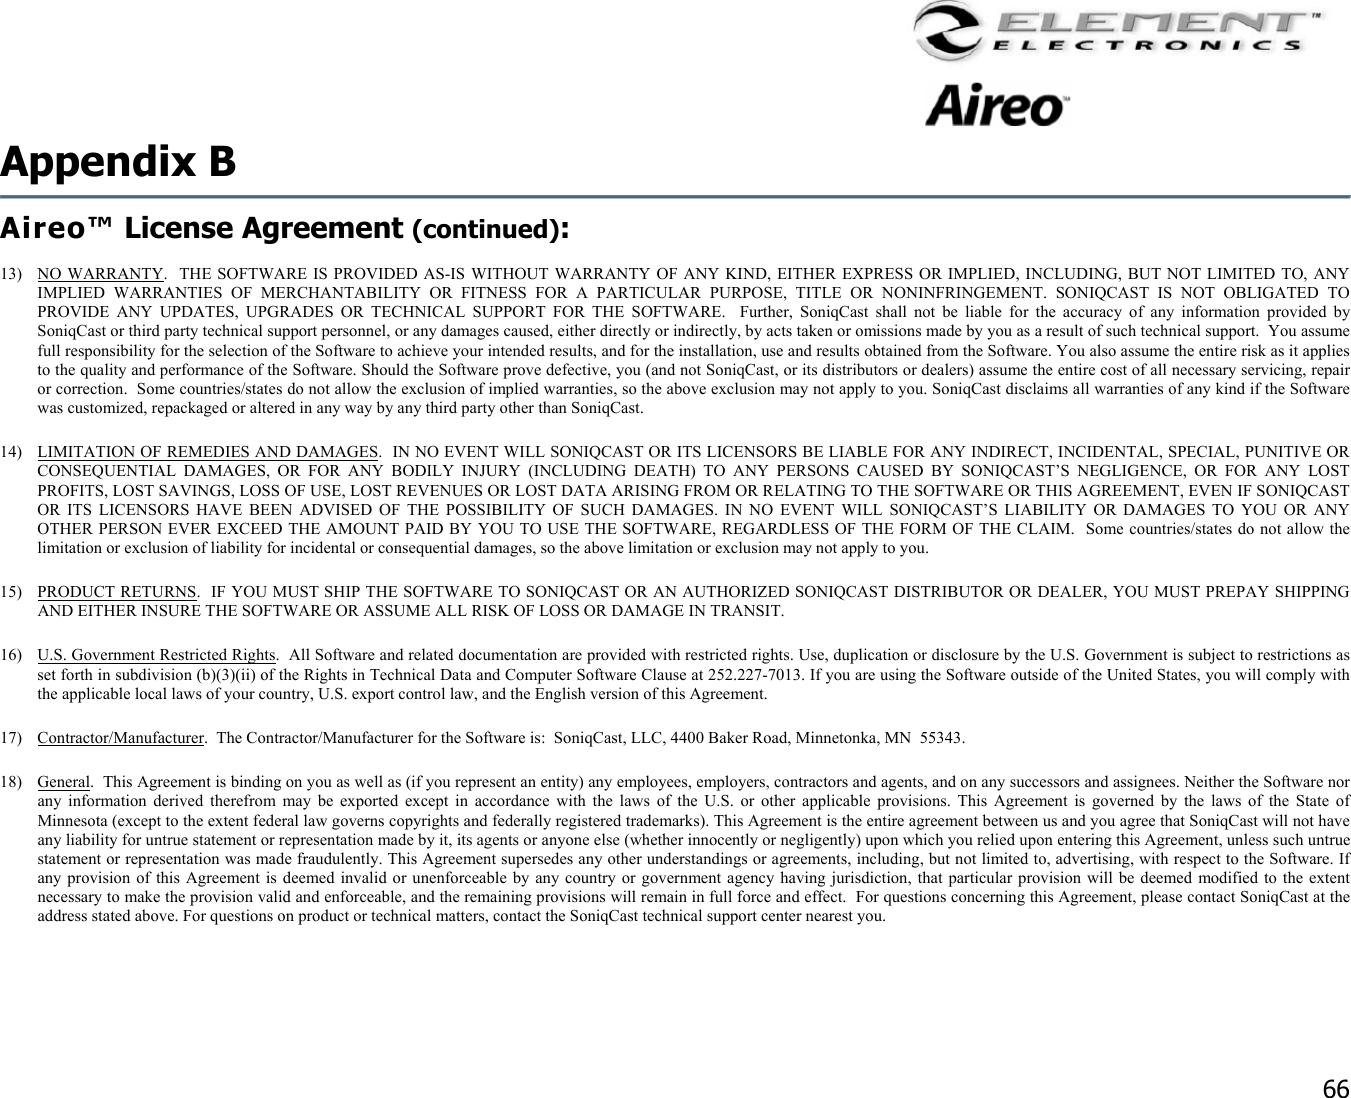                                                                                    66 Appendix B   Aireo™ License Agreement (continued):  13) NO WARRANTY.  THE SOFTWARE IS PROVIDED AS-IS WITHOUT WARRANTY OF ANY KIND, EITHER EXPRESS OR IMPLIED, INCLUDING, BUT NOT LIMITED TO, ANY IMPLIED WARRANTIES OF MERCHANTABILITY OR FITNESS FOR A PARTICULAR PURPOSE, TITLE OR NONINFRINGEMENT. SONIQCAST IS NOT OBLIGATED TO PROVIDE ANY UPDATES, UPGRADES OR TECHNICAL SUPPORT FOR THE SOFTWARE.  Further, SoniqCast shall not be liable for the accuracy of any information provided by SoniqCast or third party technical support personnel, or any damages caused, either directly or indirectly, by acts taken or omissions made by you as a result of such technical support.  You assume full responsibility for the selection of the Software to achieve your intended results, and for the installation, use and results obtained from the Software. You also assume the entire risk as it applies to the quality and performance of the Software. Should the Software prove defective, you (and not SoniqCast, or its distributors or dealers) assume the entire cost of all necessary servicing, repair or correction.  Some countries/states do not allow the exclusion of implied warranties, so the above exclusion may not apply to you. SoniqCast disclaims all warranties of any kind if the Software was customized, repackaged or altered in any way by any third party other than SoniqCast. 14)  LIMITATION OF REMEDIES AND DAMAGES.  IN NO EVENT WILL SONIQCAST OR ITS LICENSORS BE LIABLE FOR ANY INDIRECT, INCIDENTAL, SPECIAL, PUNITIVE OR CONSEQUENTIAL DAMAGES, OR FOR ANY BODILY INJURY (INCLUDING DEATH) TO ANY PERSONS CAUSED BY SONIQCAST’S NEGLIGENCE, OR FOR ANY LOST PROFITS, LOST SAVINGS, LOSS OF USE, LOST REVENUES OR LOST DATA ARISING FROM OR RELATING TO THE SOFTWARE OR THIS AGREEMENT, EVEN IF SONIQCAST OR ITS LICENSORS HAVE BEEN ADVISED OF THE POSSIBILITY OF SUCH DAMAGES. IN NO EVENT WILL SONIQCAST’S LIABILITY OR DAMAGES TO YOU OR ANY OTHER PERSON EVER EXCEED THE AMOUNT PAID BY YOU TO USE THE SOFTWARE, REGARDLESS OF THE FORM OF THE CLAIM.  Some countries/states do not allow the limitation or exclusion of liability for incidental or consequential damages, so the above limitation or exclusion may not apply to you. 15) PRODUCT RETURNS.  IF YOU MUST SHIP THE SOFTWARE TO SONIQCAST OR AN AUTHORIZED SONIQCAST DISTRIBUTOR OR DEALER, YOU MUST PREPAY SHIPPING AND EITHER INSURE THE SOFTWARE OR ASSUME ALL RISK OF LOSS OR DAMAGE IN TRANSIT. 16)  U.S. Government Restricted Rights.  All Software and related documentation are provided with restricted rights. Use, duplication or disclosure by the U.S. Government is subject to restrictions as set forth in subdivision (b)(3)(ii) of the Rights in Technical Data and Computer Software Clause at 252.227-7013. If you are using the Software outside of the United States, you will comply with the applicable local laws of your country, U.S. export control law, and the English version of this Agreement. 17) Contractor/Manufacturer.  The Contractor/Manufacturer for the Software is:  SoniqCast, LLC, 4400 Baker Road, Minnetonka, MN  55343. 18) General.  This Agreement is binding on you as well as (if you represent an entity) any employees, employers, contractors and agents, and on any successors and assignees. Neither the Software nor any information derived therefrom may be exported except in accordance with the laws of the U.S. or other applicable provisions. This Agreement is governed by the laws of the State of Minnesota (except to the extent federal law governs copyrights and federally registered trademarks). This Agreement is the entire agreement between us and you agree that SoniqCast will not have any liability for untrue statement or representation made by it, its agents or anyone else (whether innocently or negligently) upon which you relied upon entering this Agreement, unless such untrue statement or representation was made fraudulently. This Agreement supersedes any other understandings or agreements, including, but not limited to, advertising, with respect to the Software. If any provision of this Agreement is deemed invalid or unenforceable by any country or government agency having jurisdiction, that particular provision will be deemed modified to the extent necessary to make the provision valid and enforceable, and the remaining provisions will remain in full force and effect.  For questions concerning this Agreement, please contact SoniqCast at the address stated above. For questions on product or technical matters, contact the SoniqCast technical support center nearest you.  